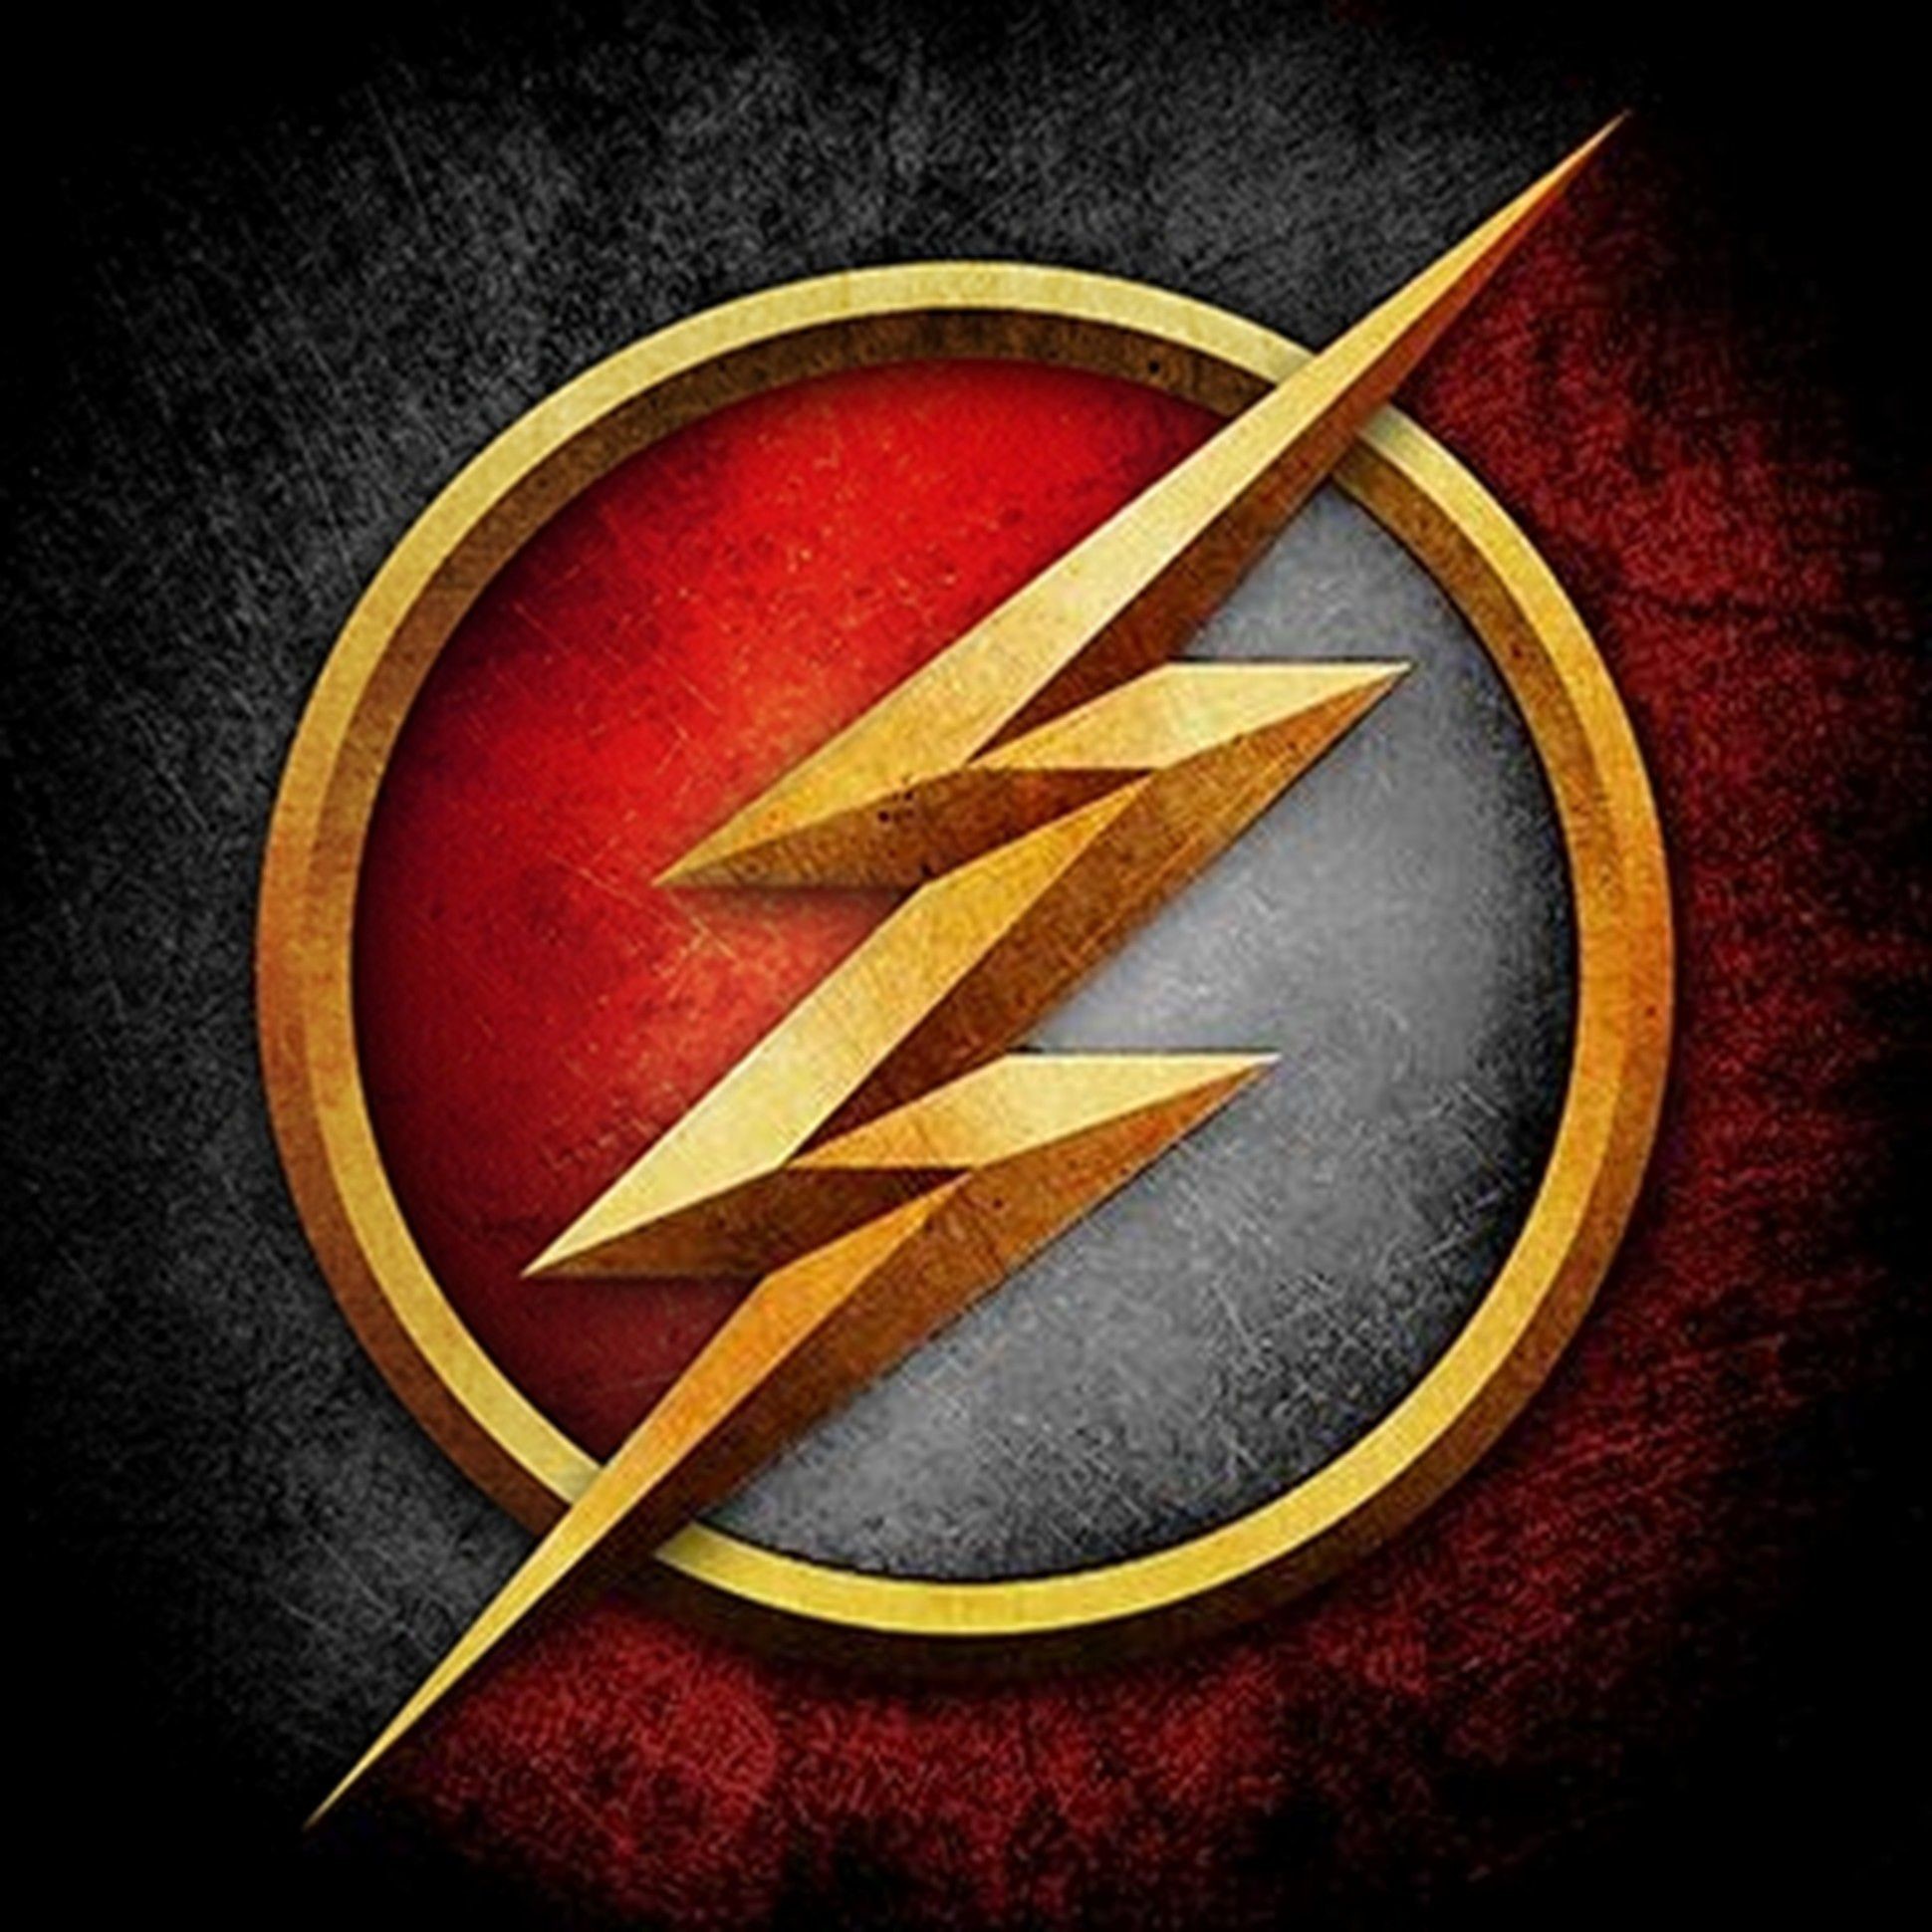 Flash Animated Wallpapers